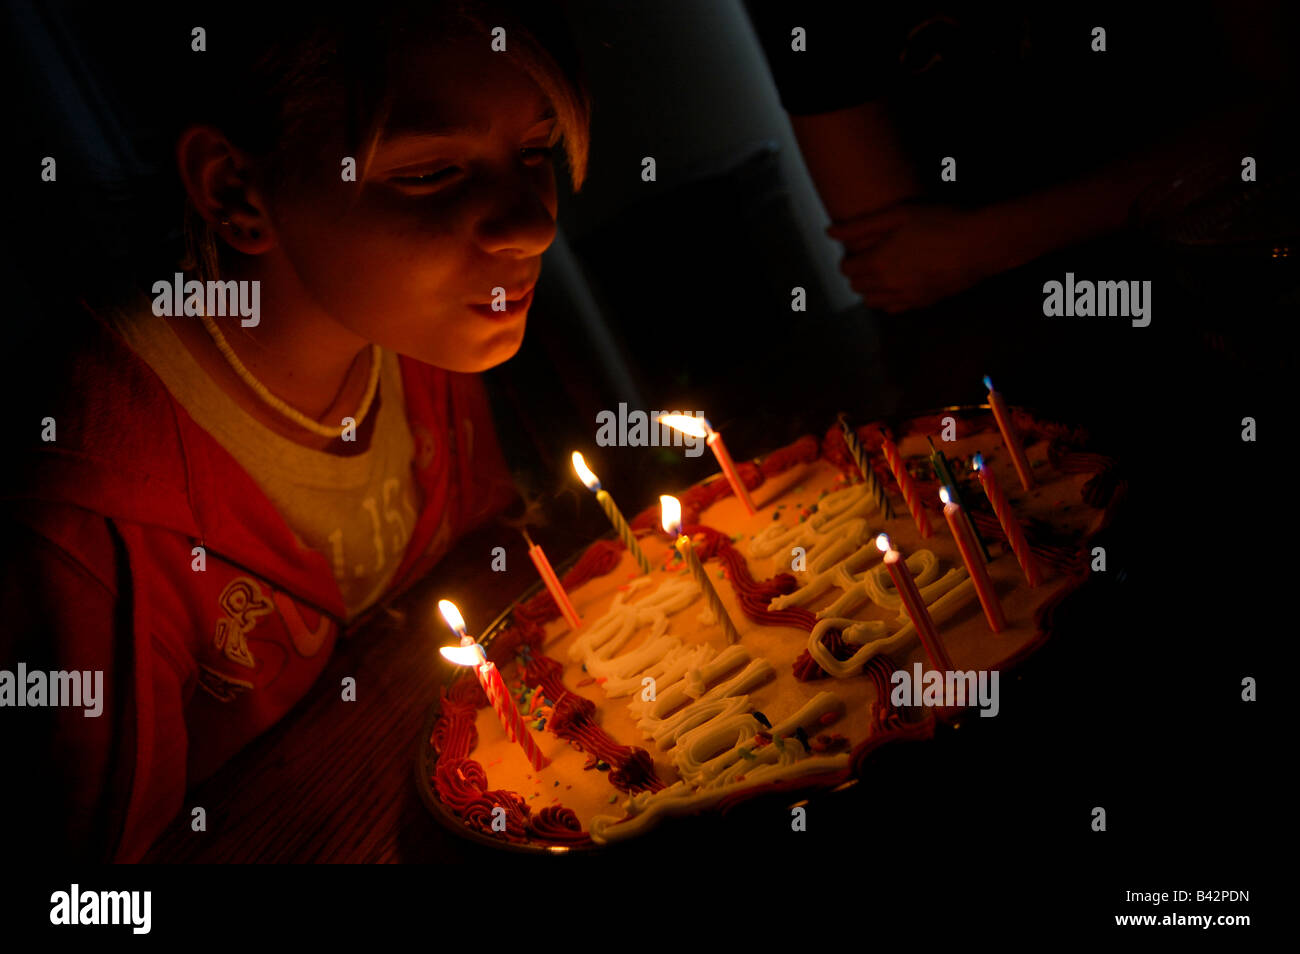 Pretty teen blond girl blowing out candles on a birthday cake in a low light environment. Stock Photo